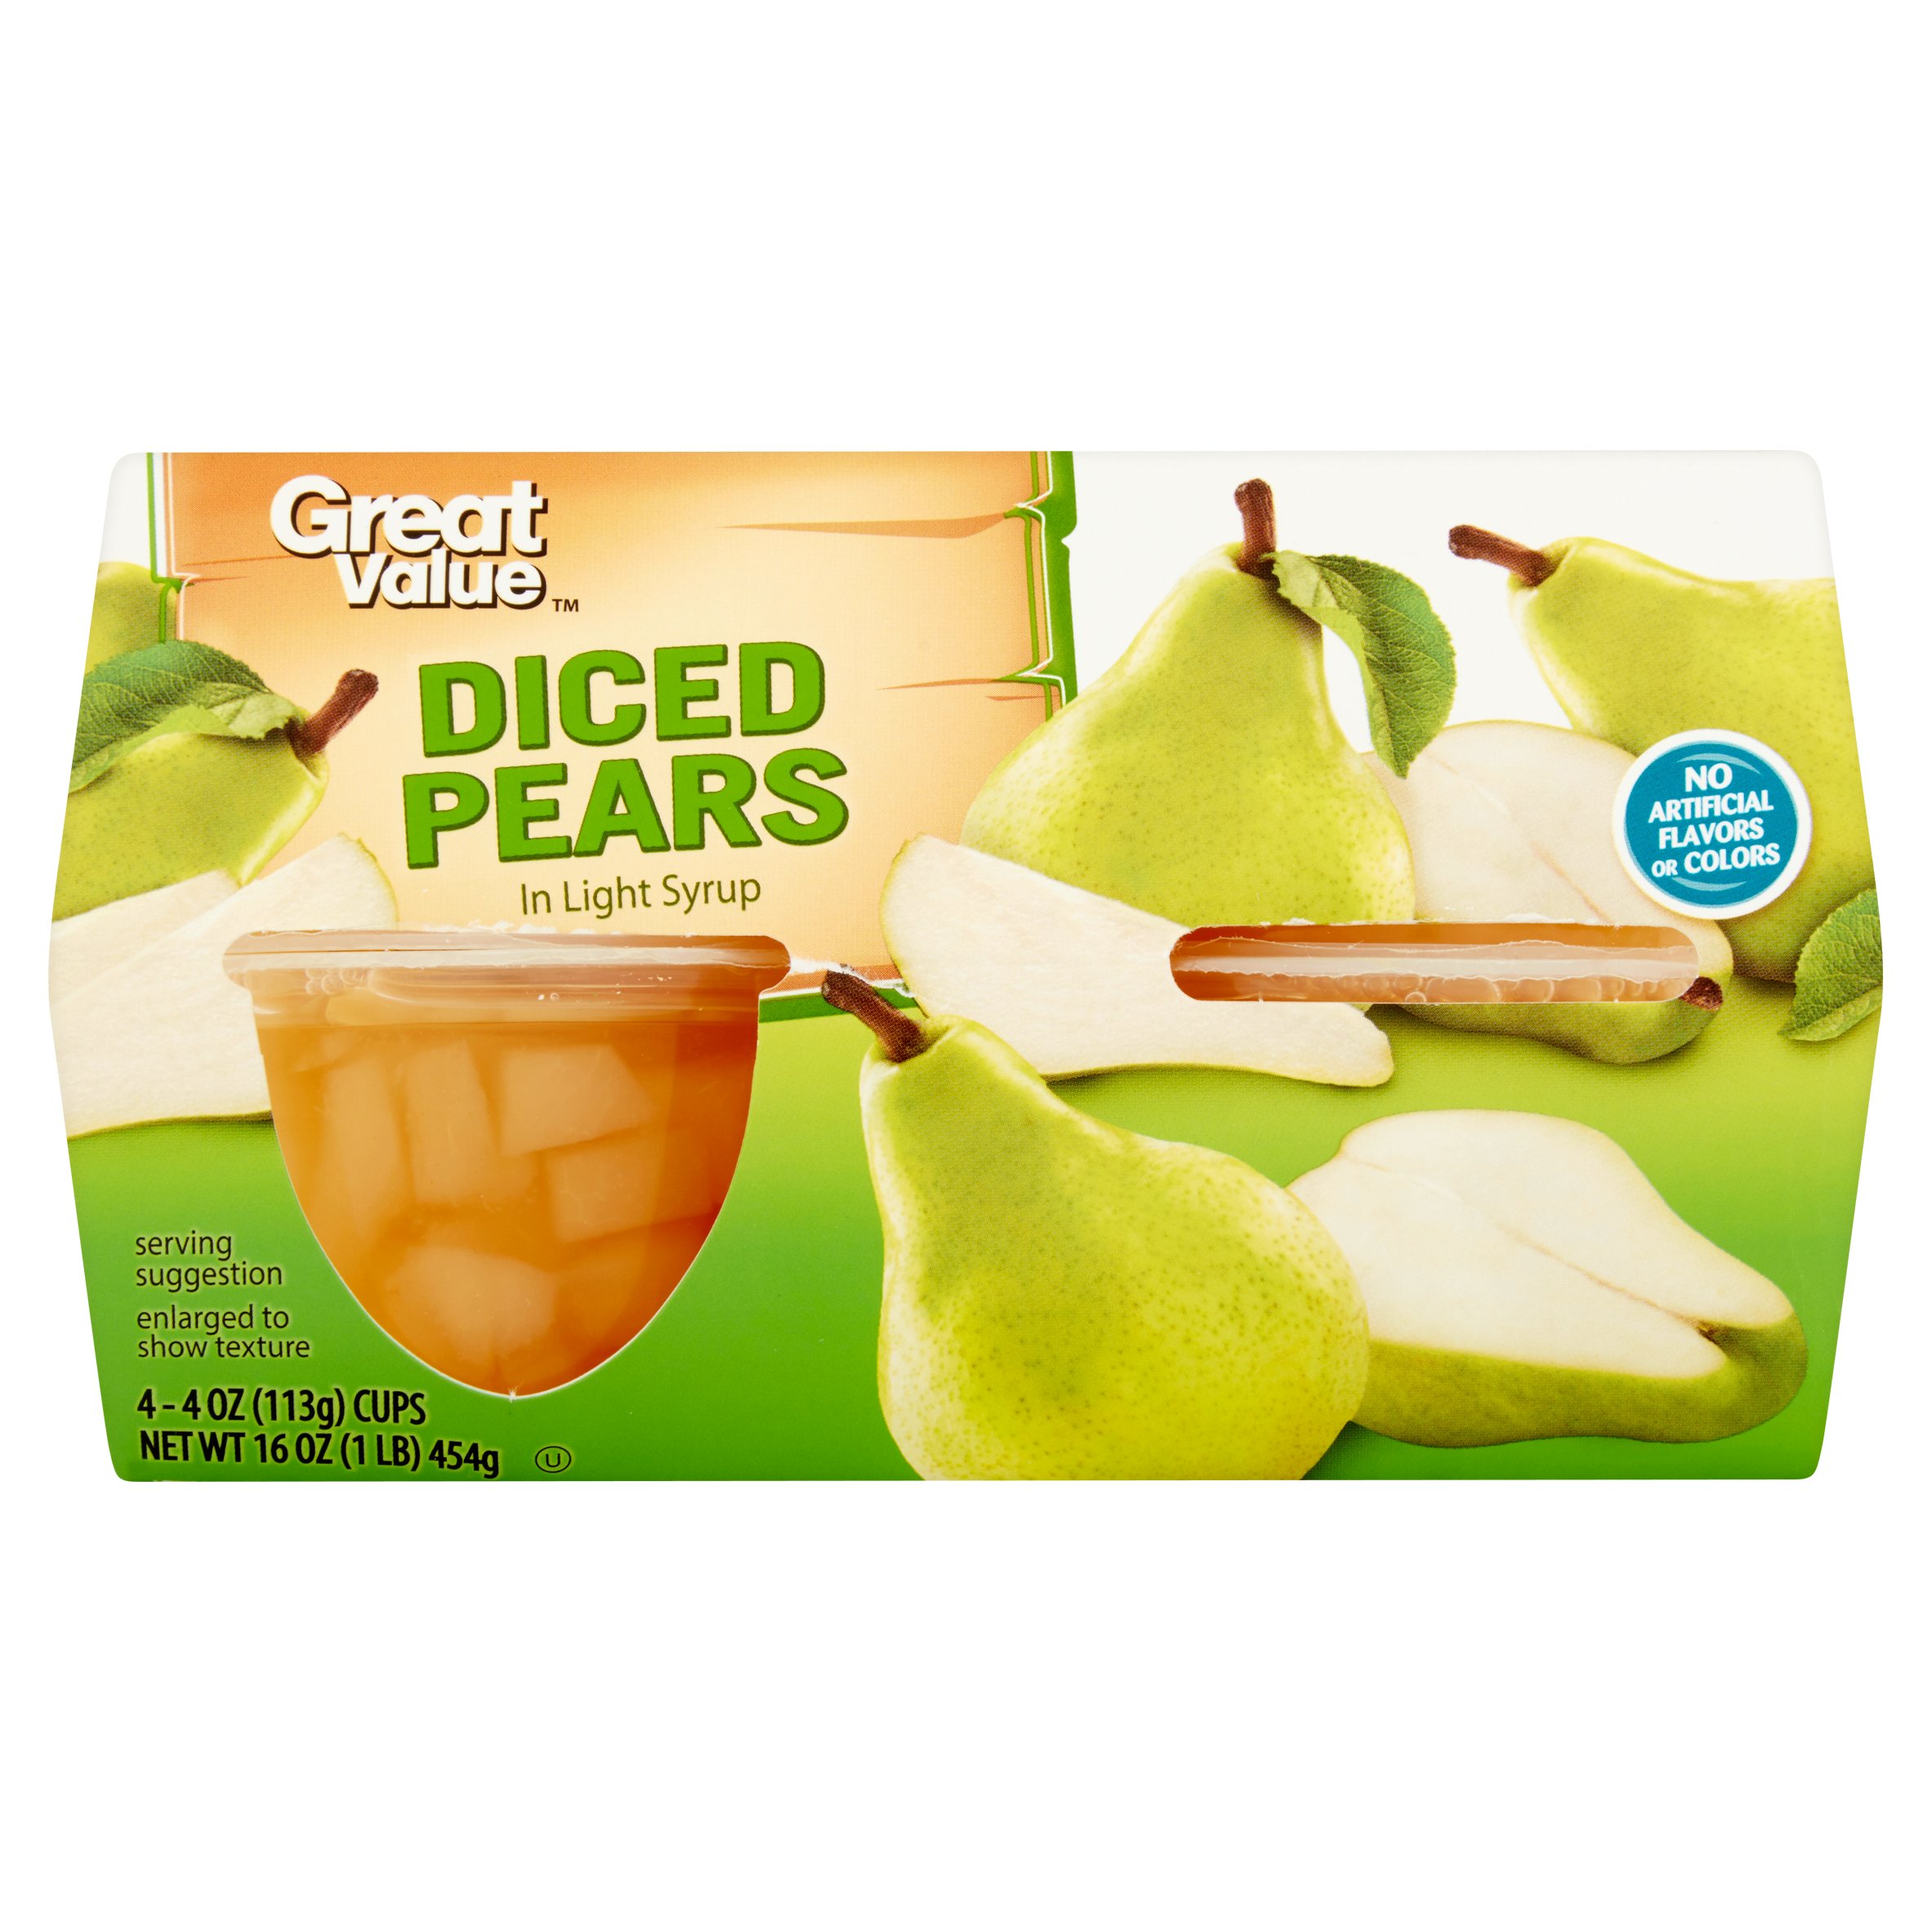 Great Value Diced Pears in Light Syrup, 4 Oz, 4 Count Image